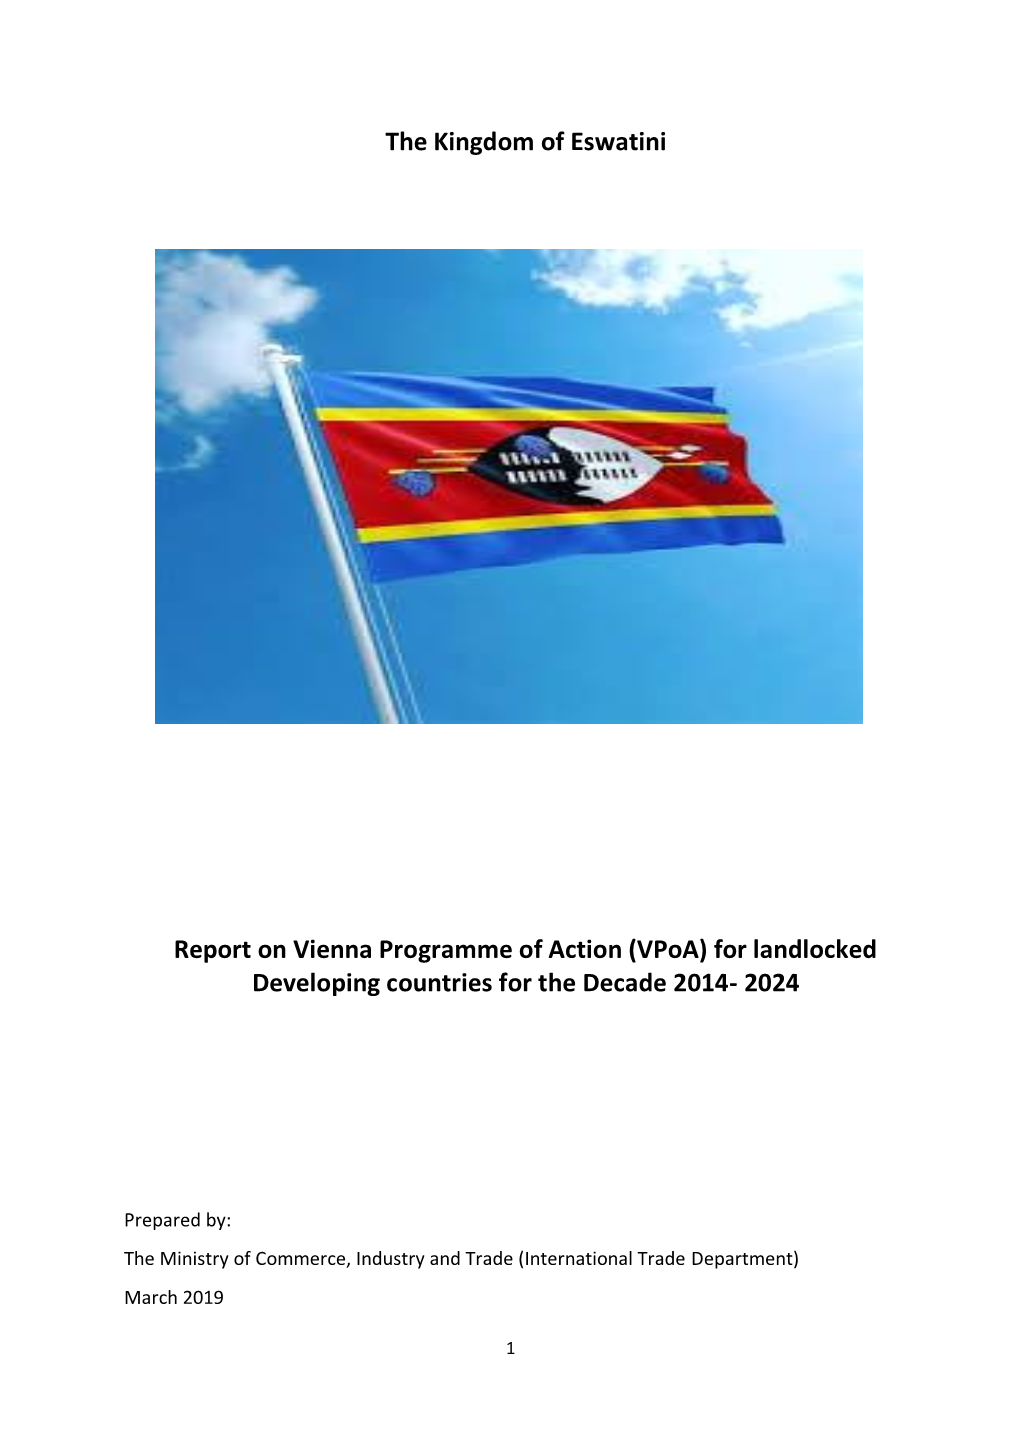 The Kingdom of Eswatini Report on Vienna Programme of Action (Vpoa